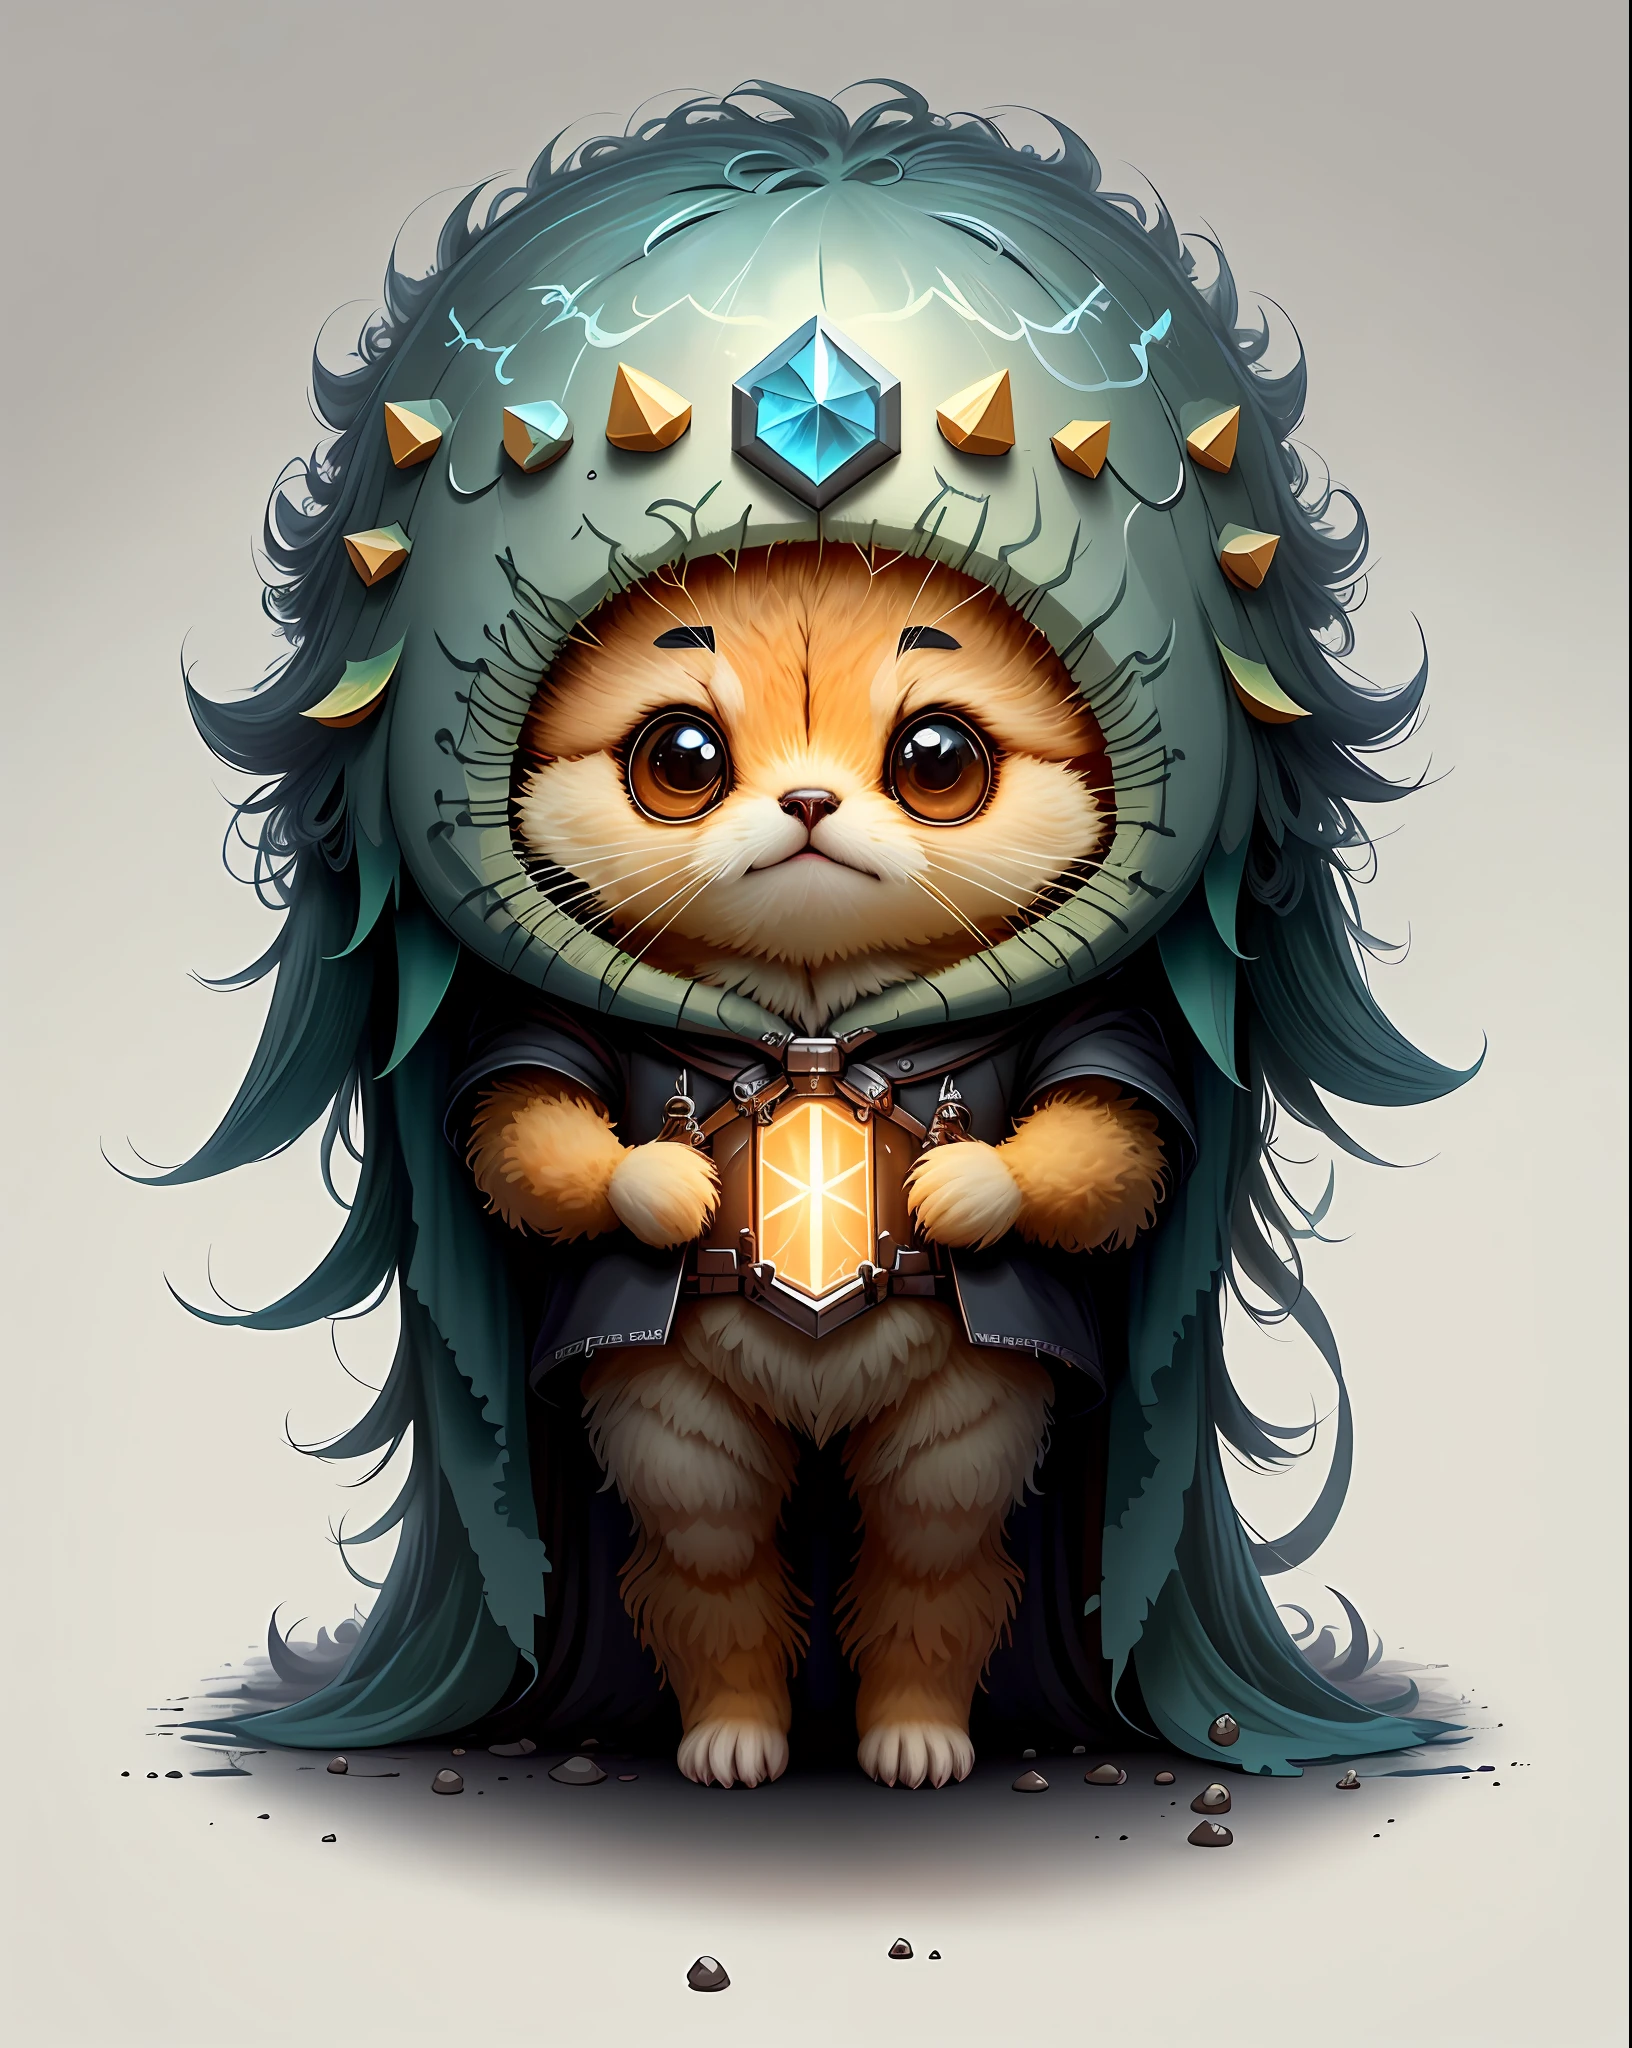 "Create a masterful masterpiece of cute creatures with ultra-detailed concept art inspired by . Utilize Stable Diffusion's power to unleash your inner Cu73Cre4ture programmer and bring your imagination to life!"